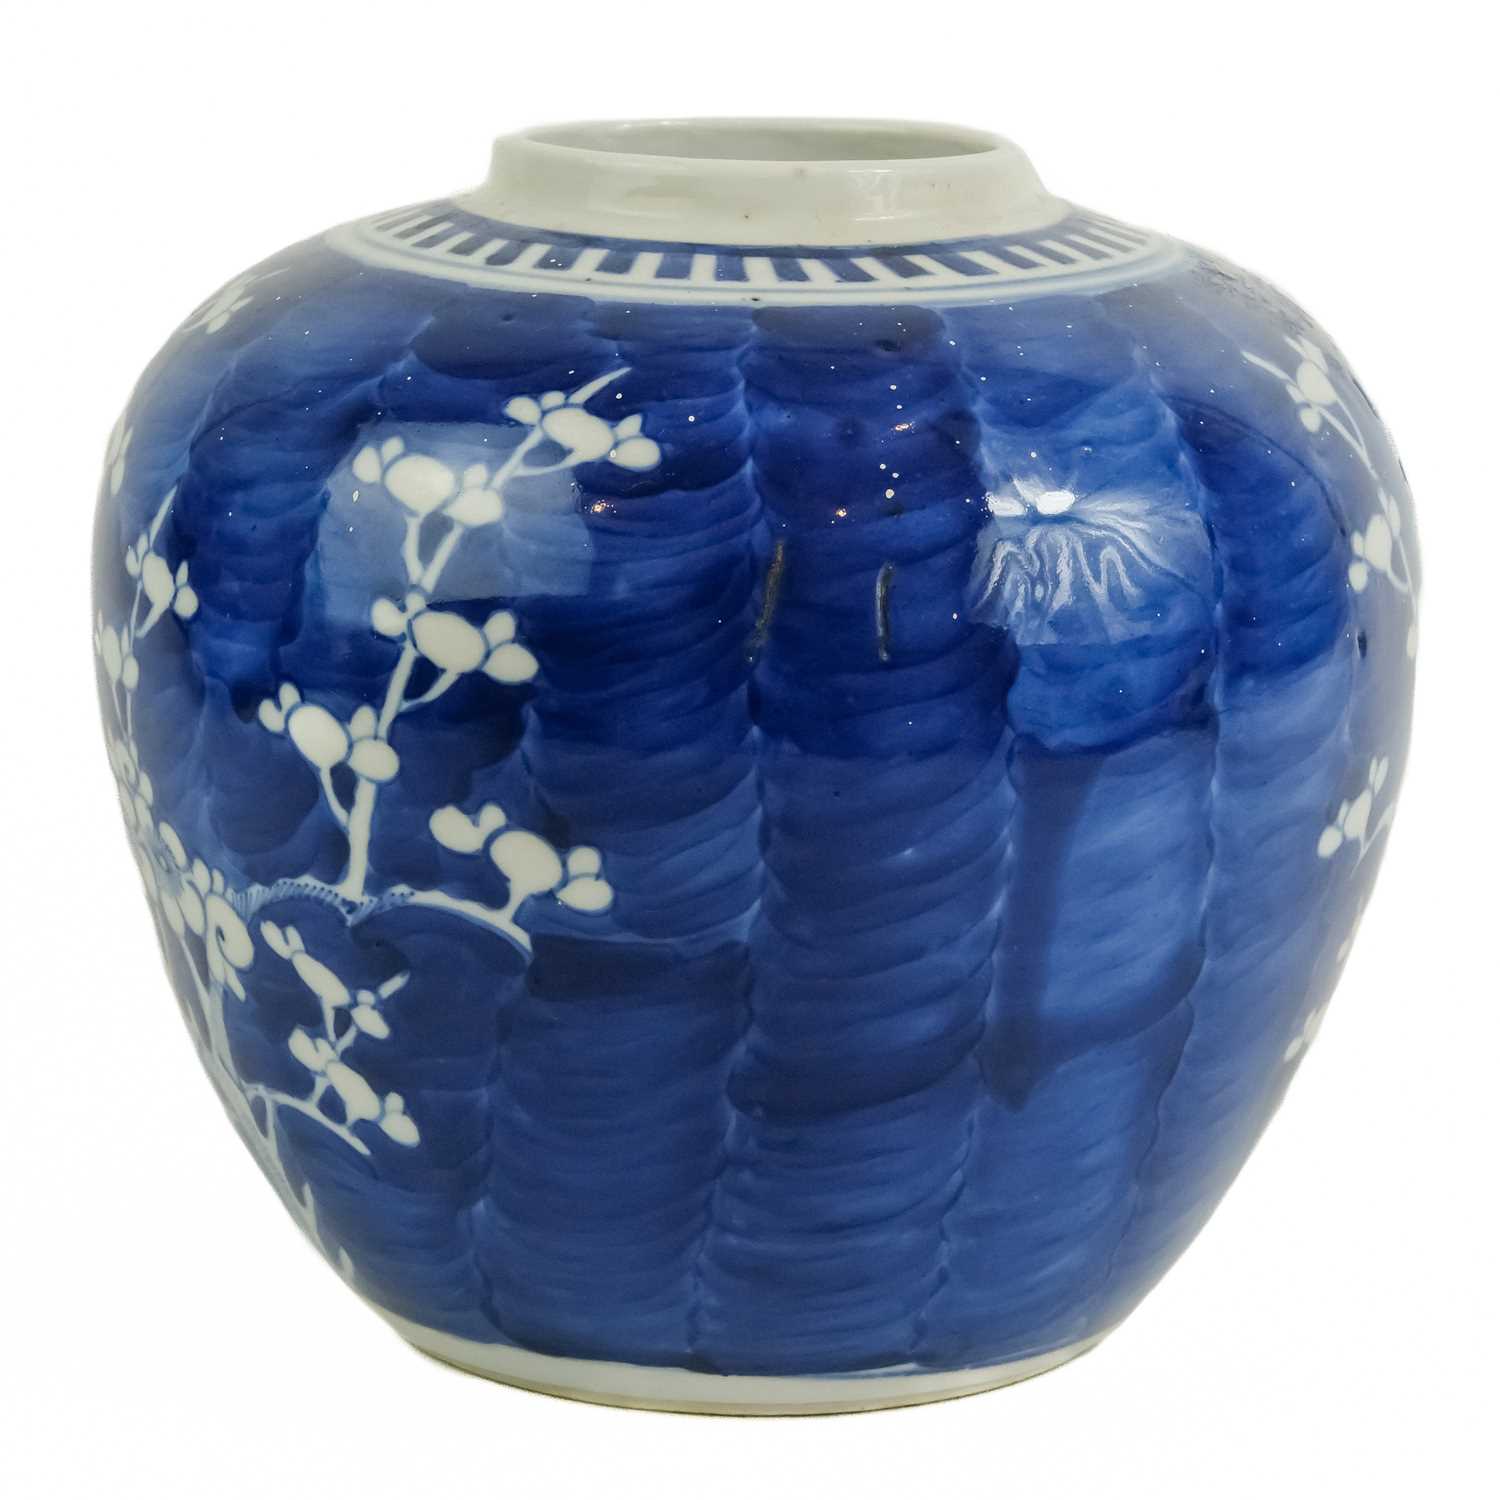 Two Chinese blue and white prunus blossom pattern ginger jars, late 19th century. - Image 9 of 10